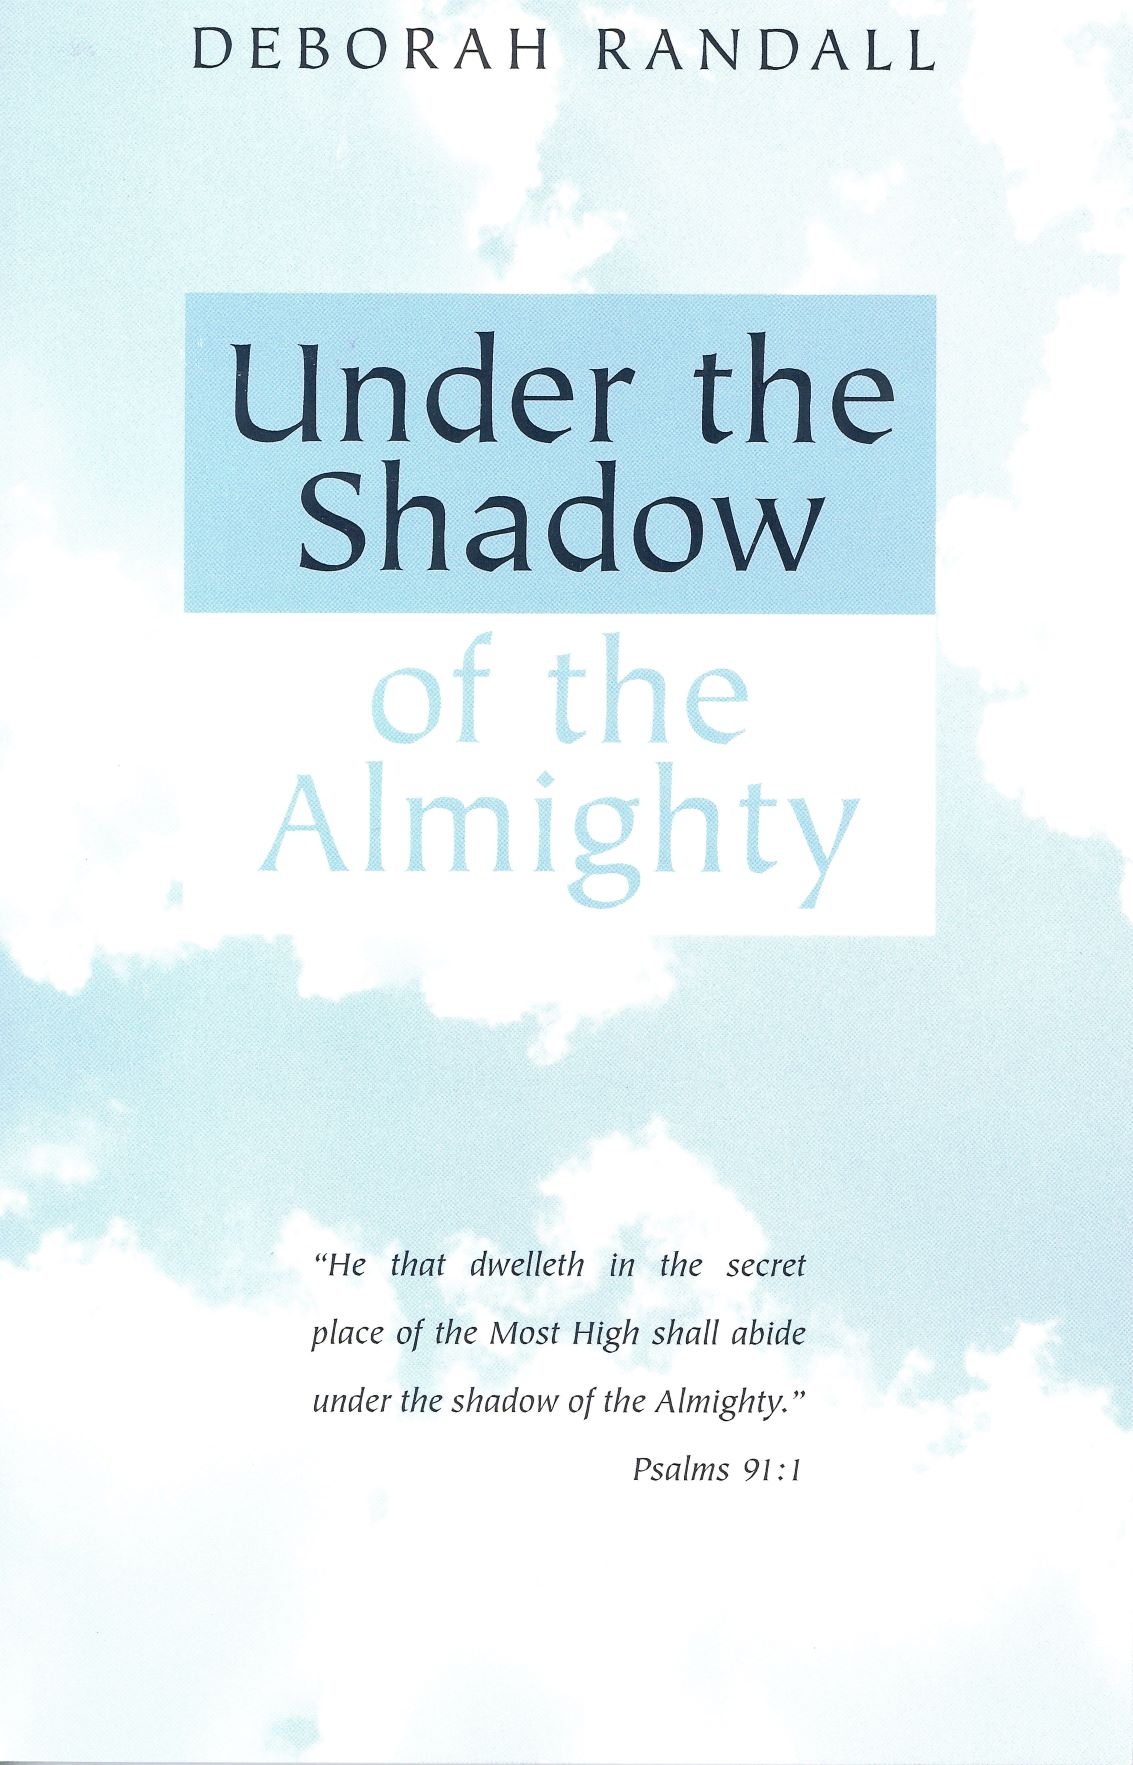 Under the Shadow of the Almighty - Deborah Randall